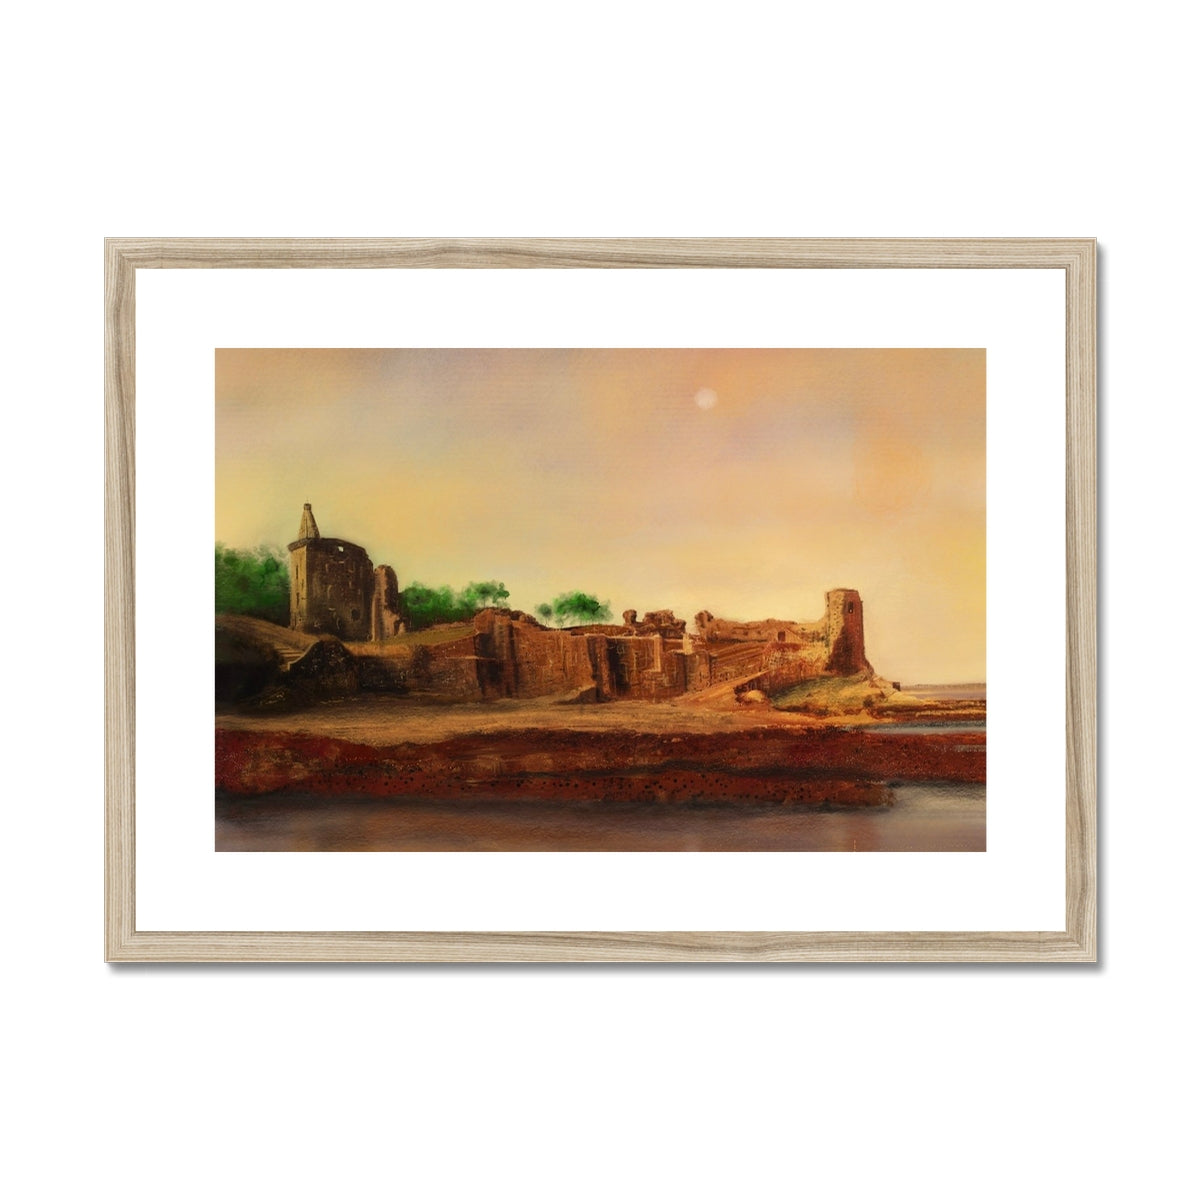 St Andrews Castle Painting | Framed & Mounted Prints From Scotland-Framed & Mounted Prints-Historic & Iconic Scotland Art Gallery-A2 Landscape-Natural Frame-Paintings, Prints, Homeware, Art Gifts From Scotland By Scottish Artist Kevin Hunter